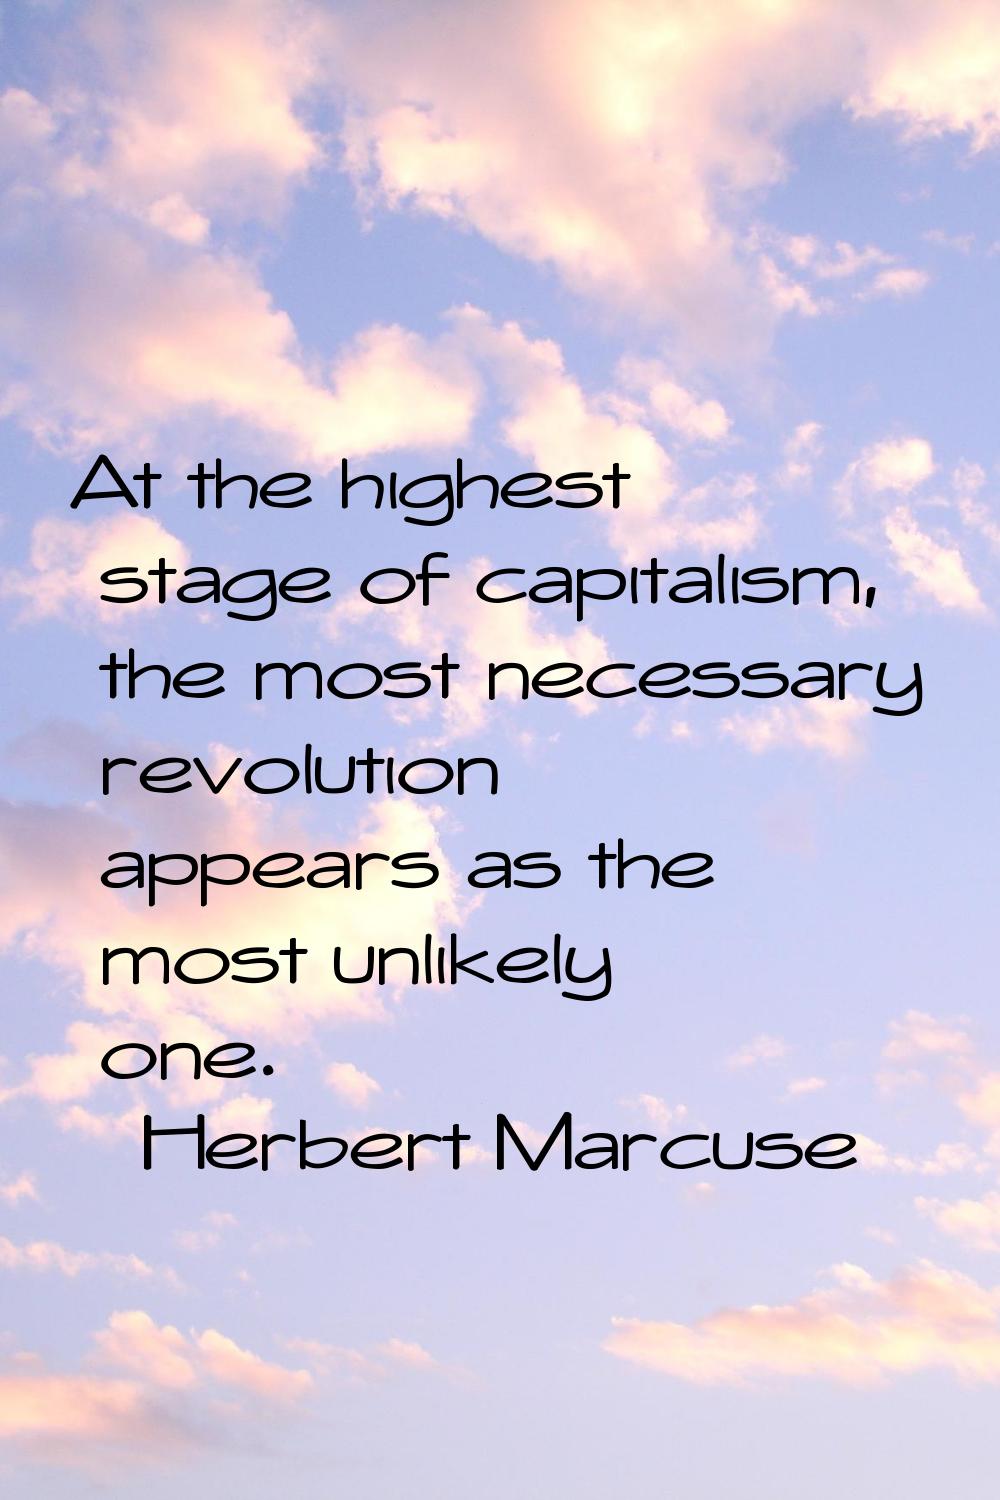 At the highest stage of capitalism, the most necessary revolution appears as the most unlikely one.